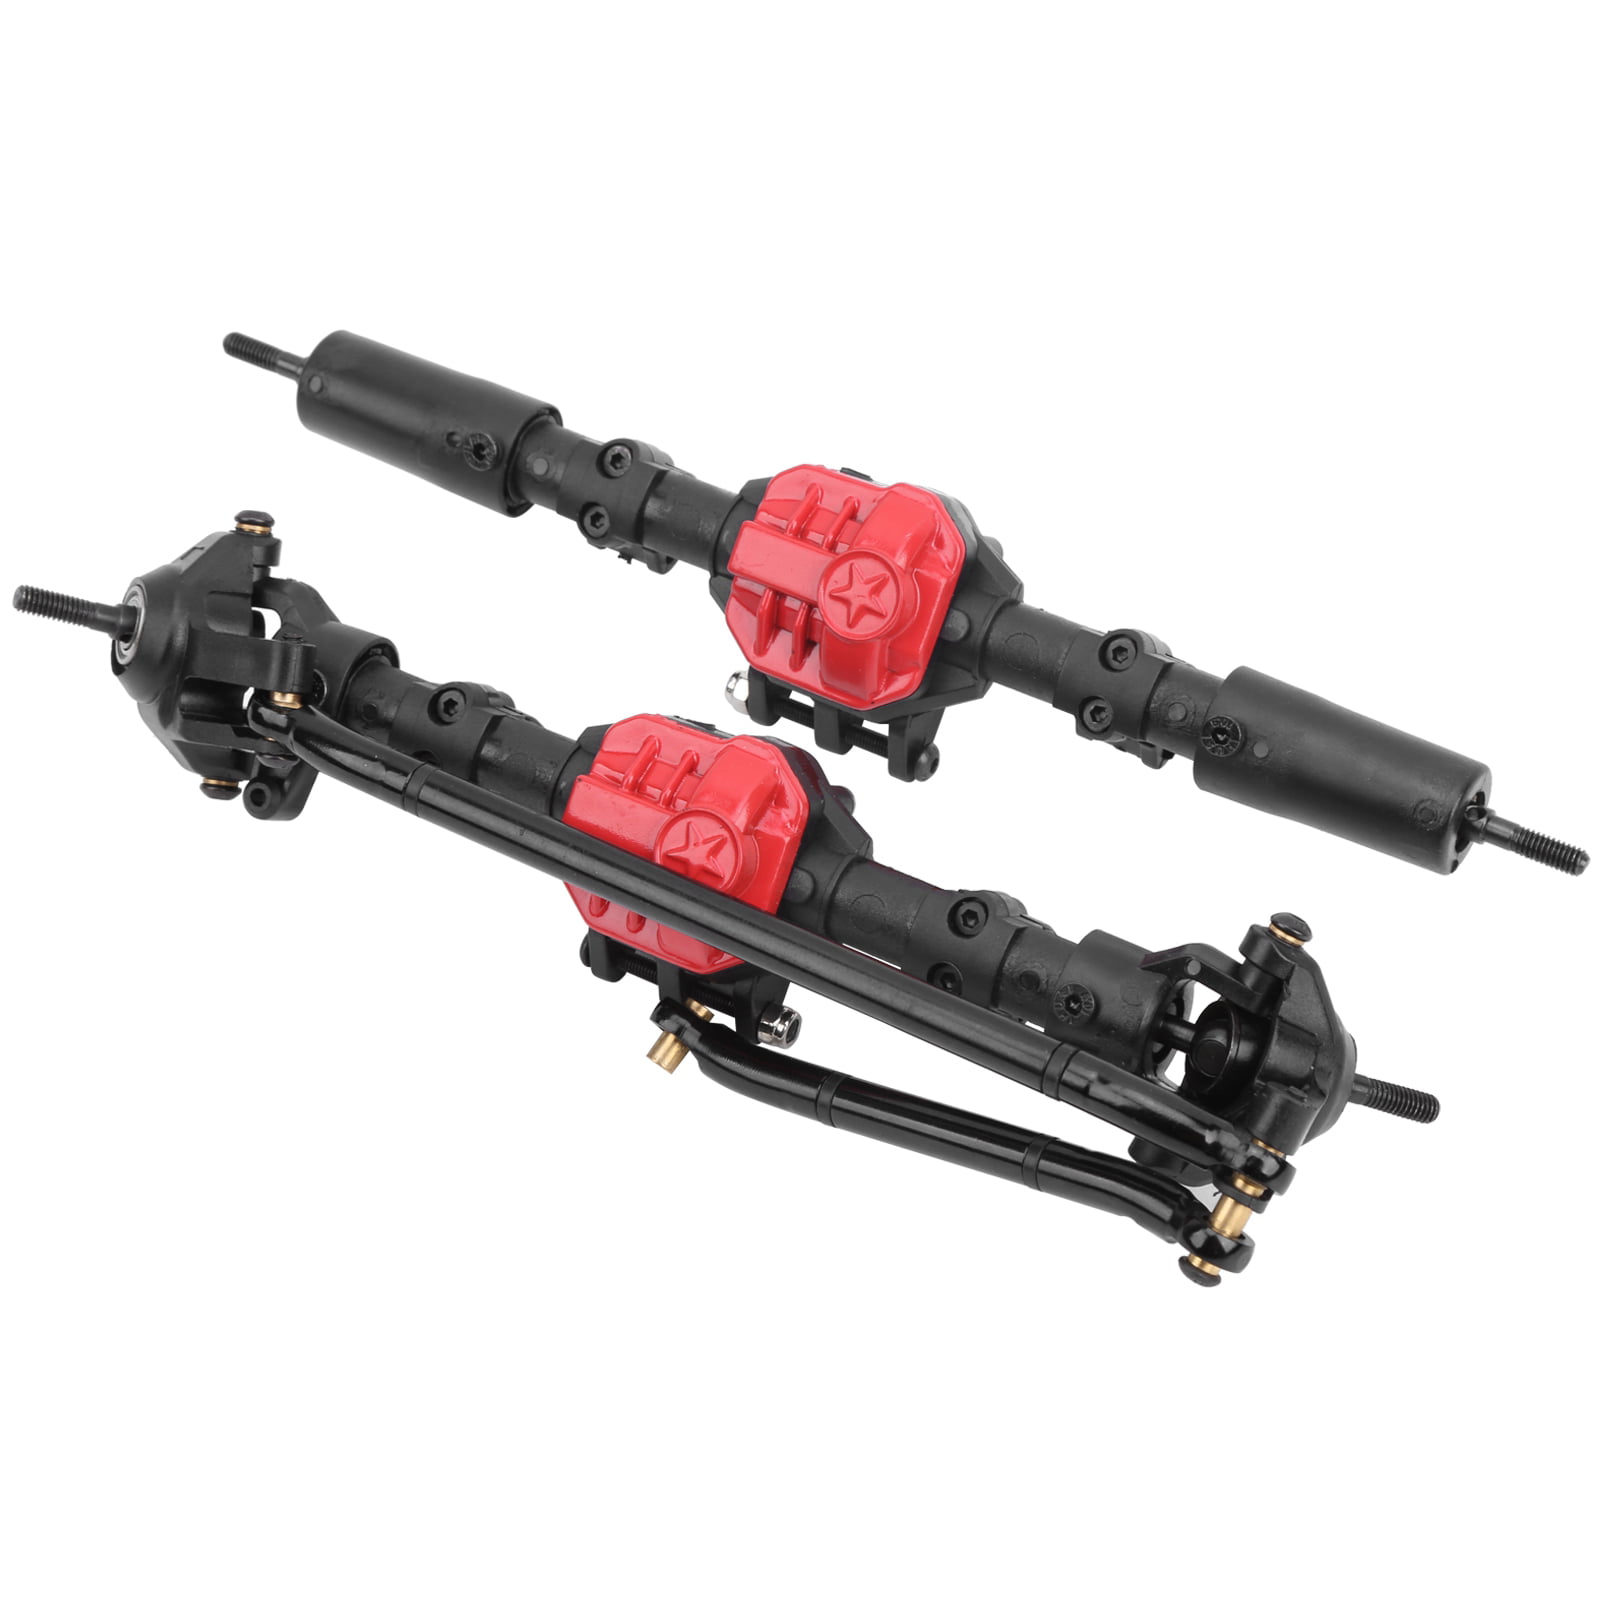 Rear Axle 2 Transimission Shaft for SCX10 I/SCX10 II 1:10 RC Car Details about   Gear Front